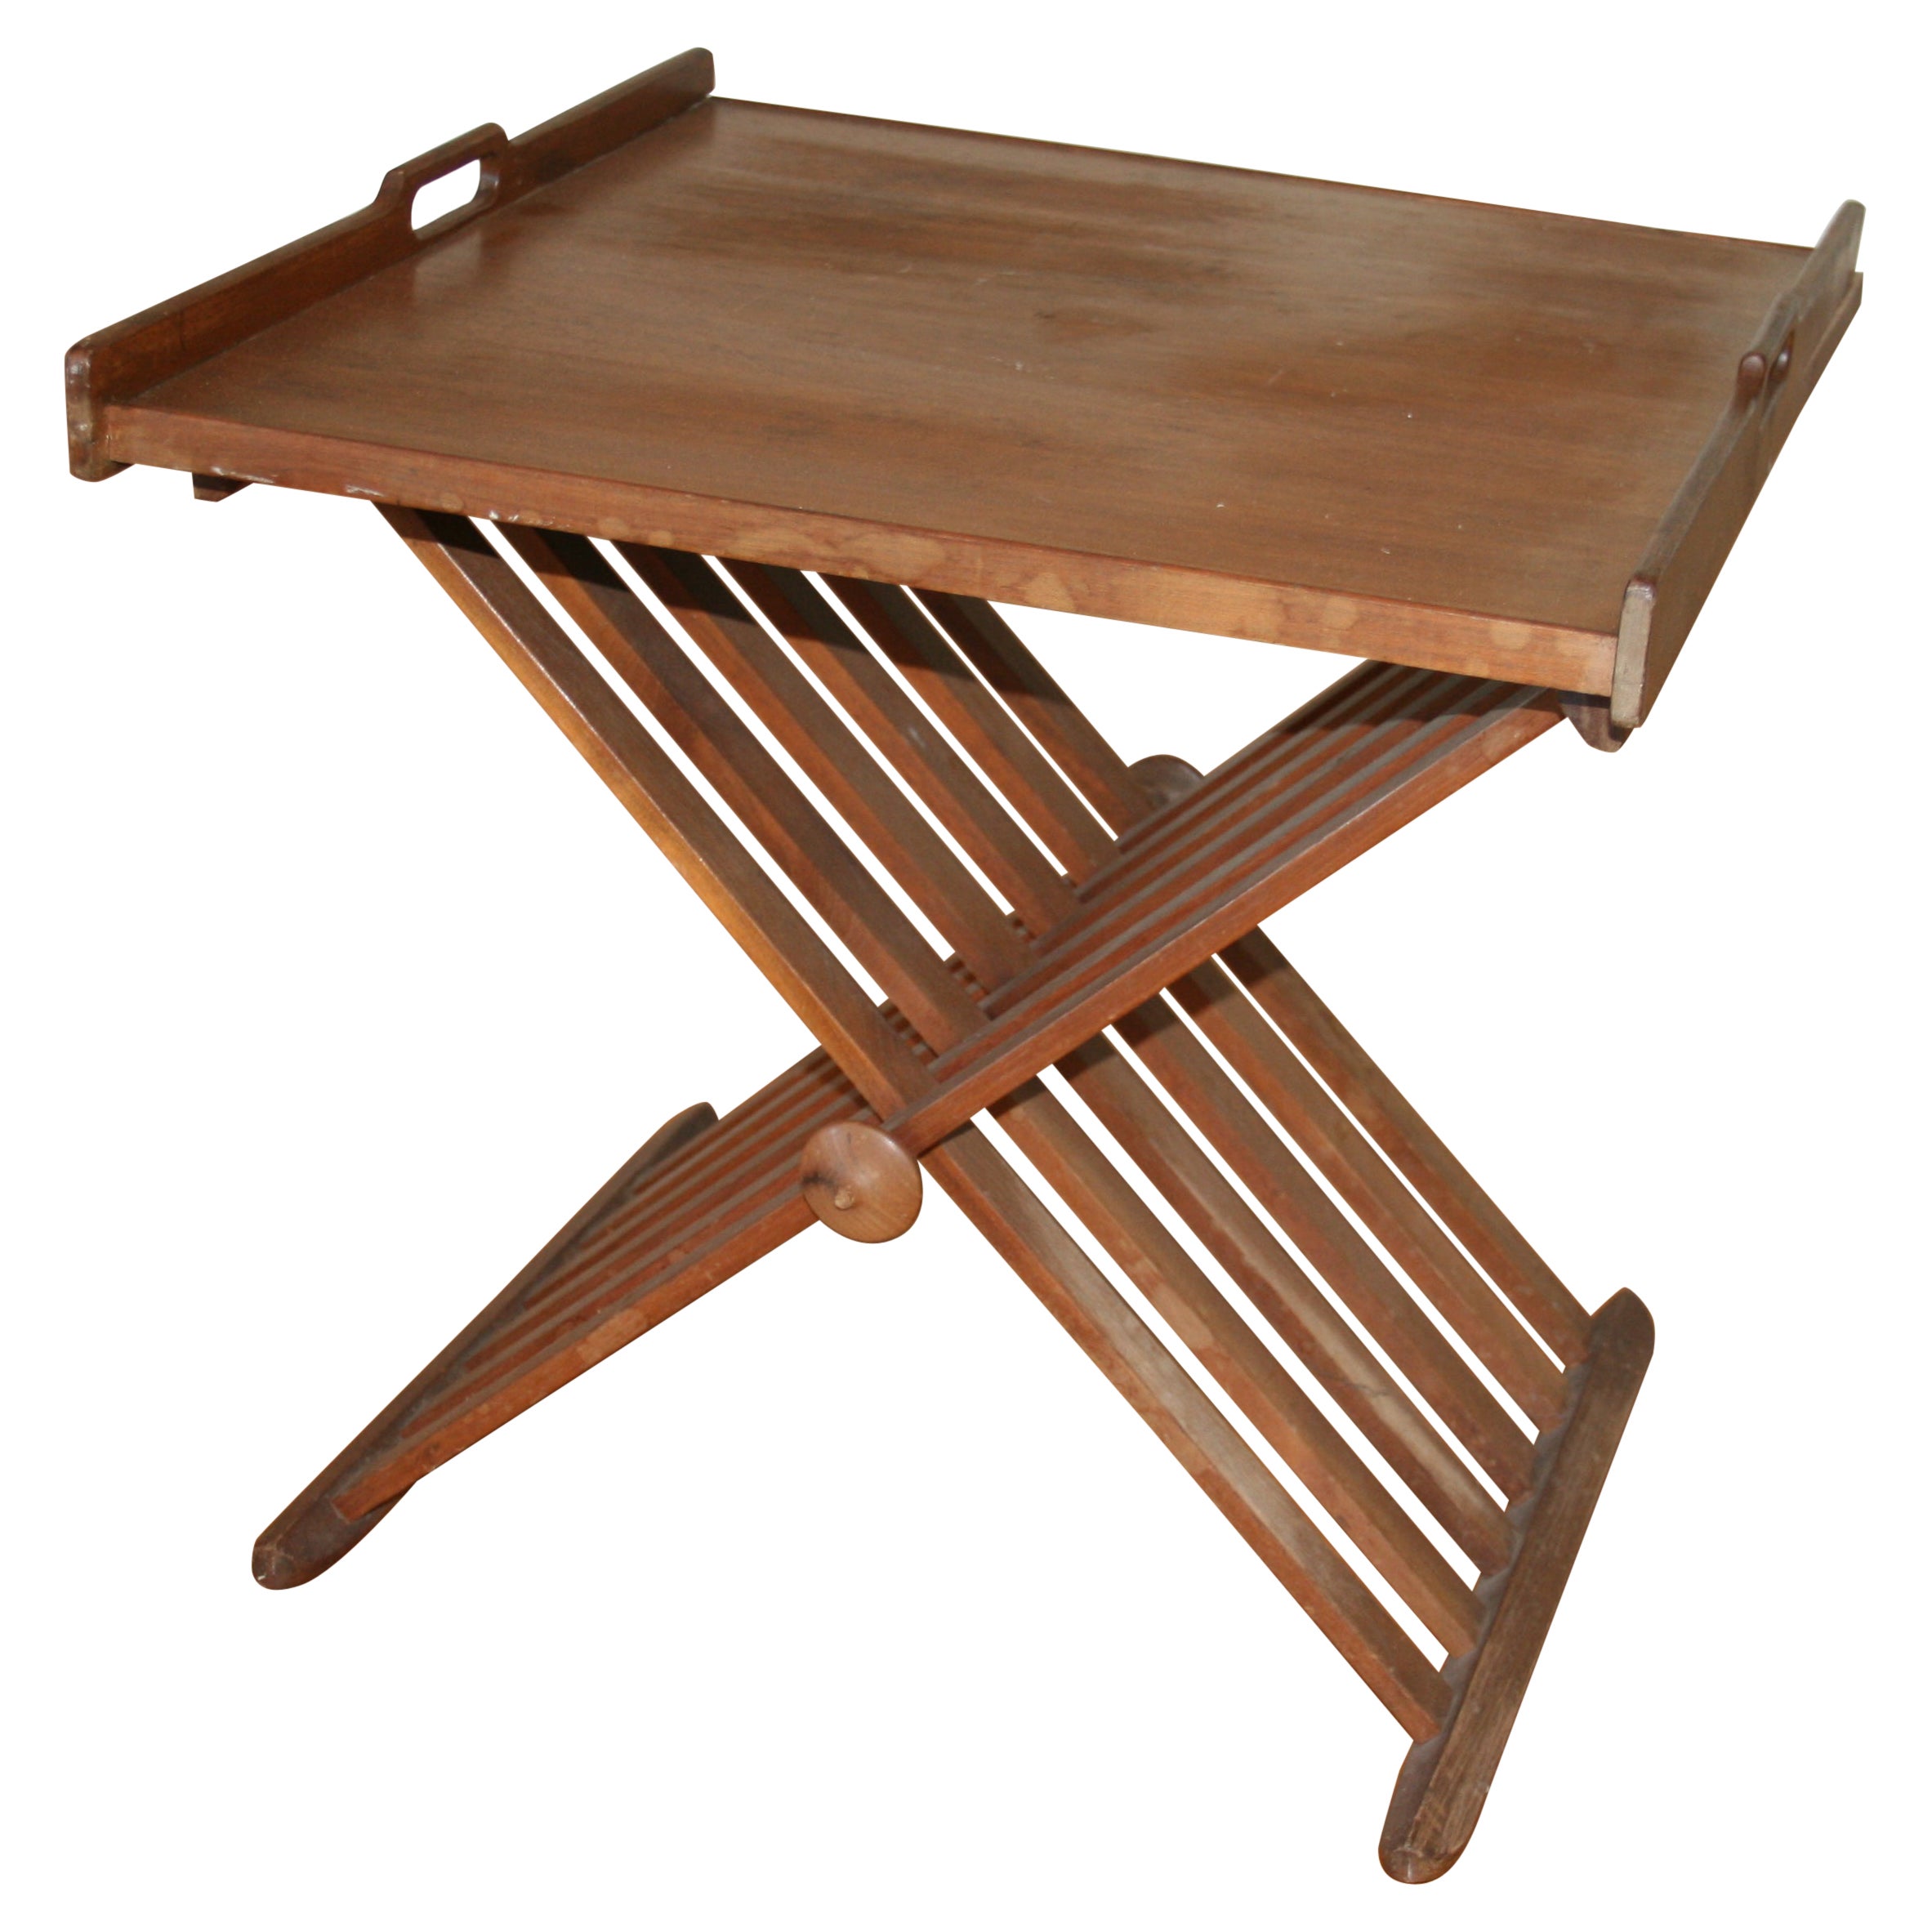   Folding Campaign Tray Table by Kipp Stewart and Stewaart McDougal for Drexel